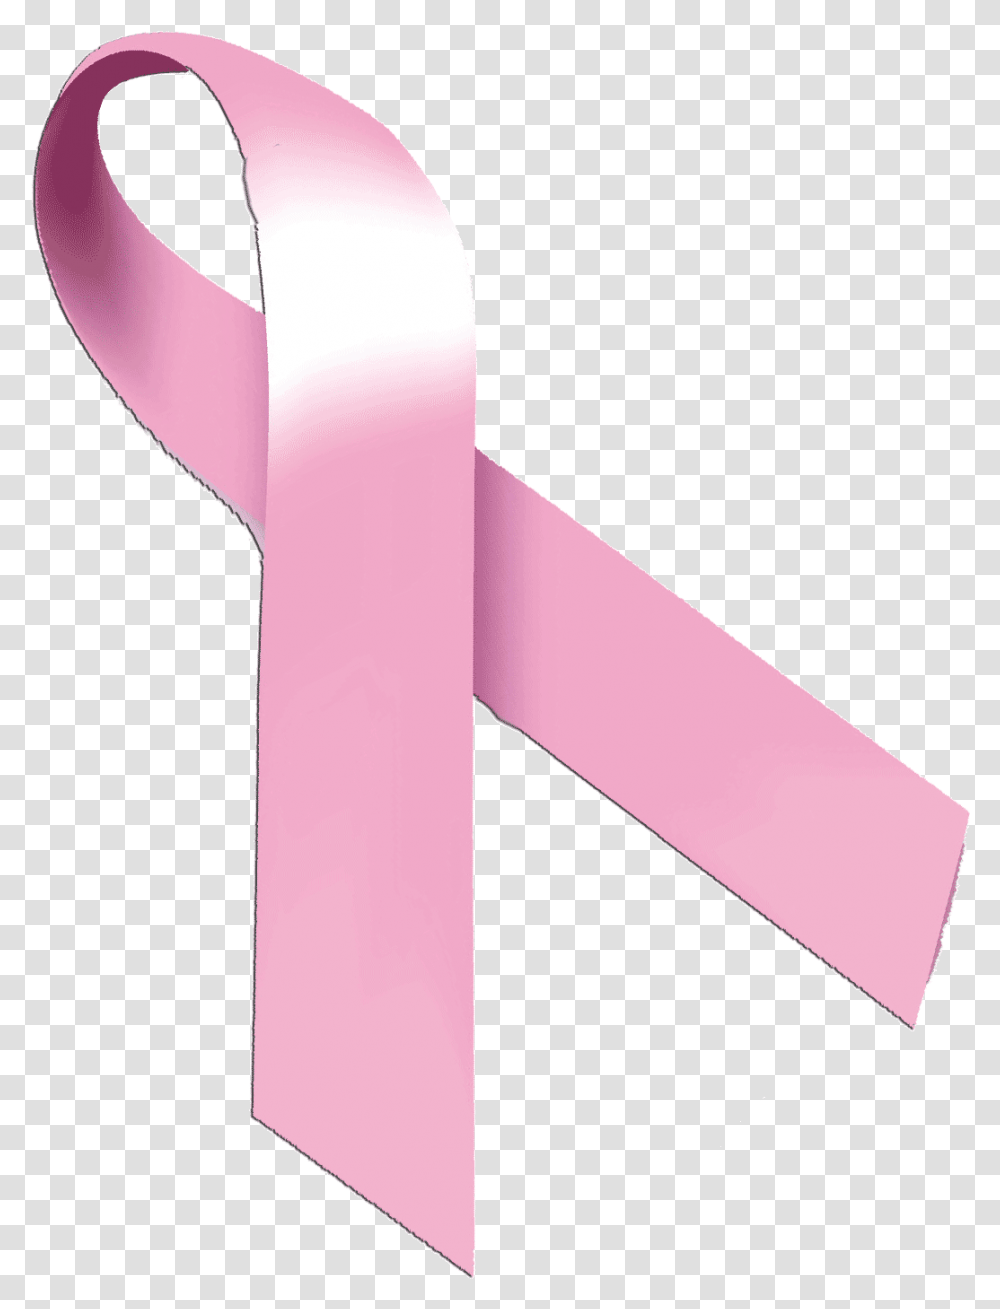 Cancer Ribbon Hd Pink Ribbon Cancer, Tie, Accessories, Accessory, Necktie Transparent Png